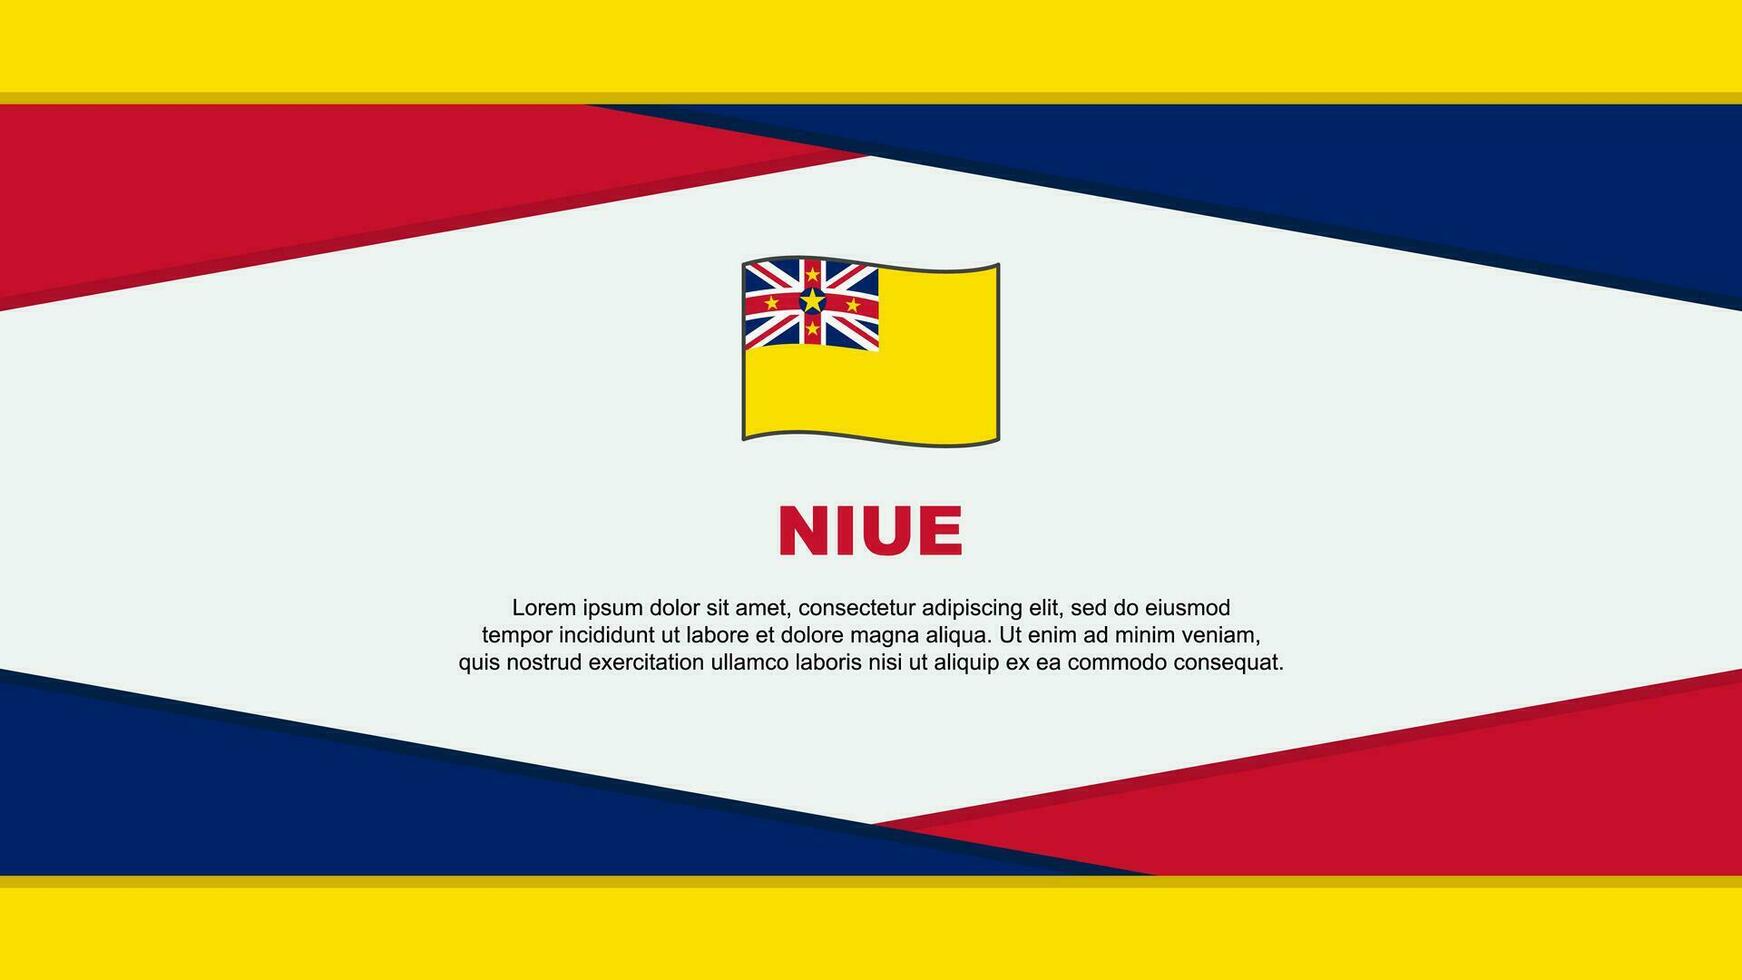 Niue Flag Abstract Background Design Template. Niue Independence Day Banner Cartoon Vector Illustration. Niue Vector